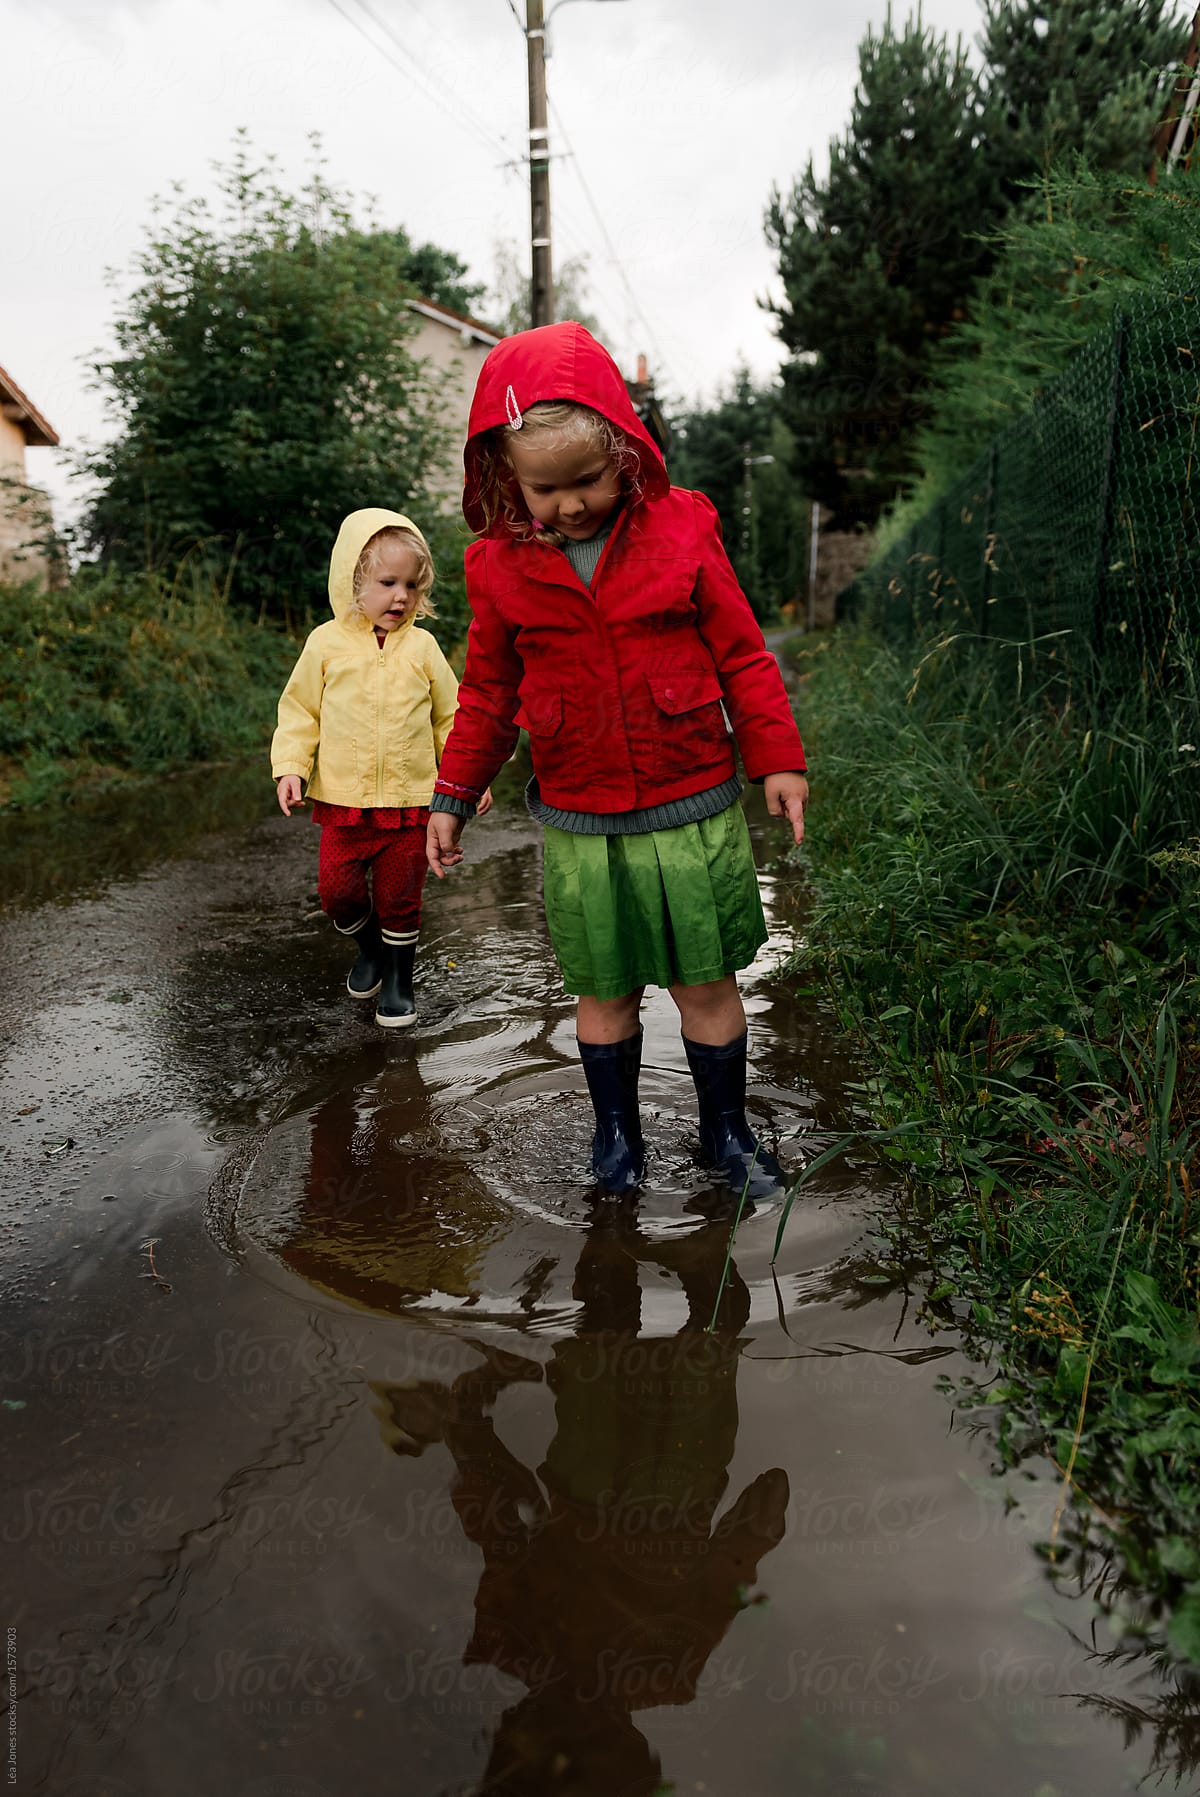 two girls playing in the street after the rain